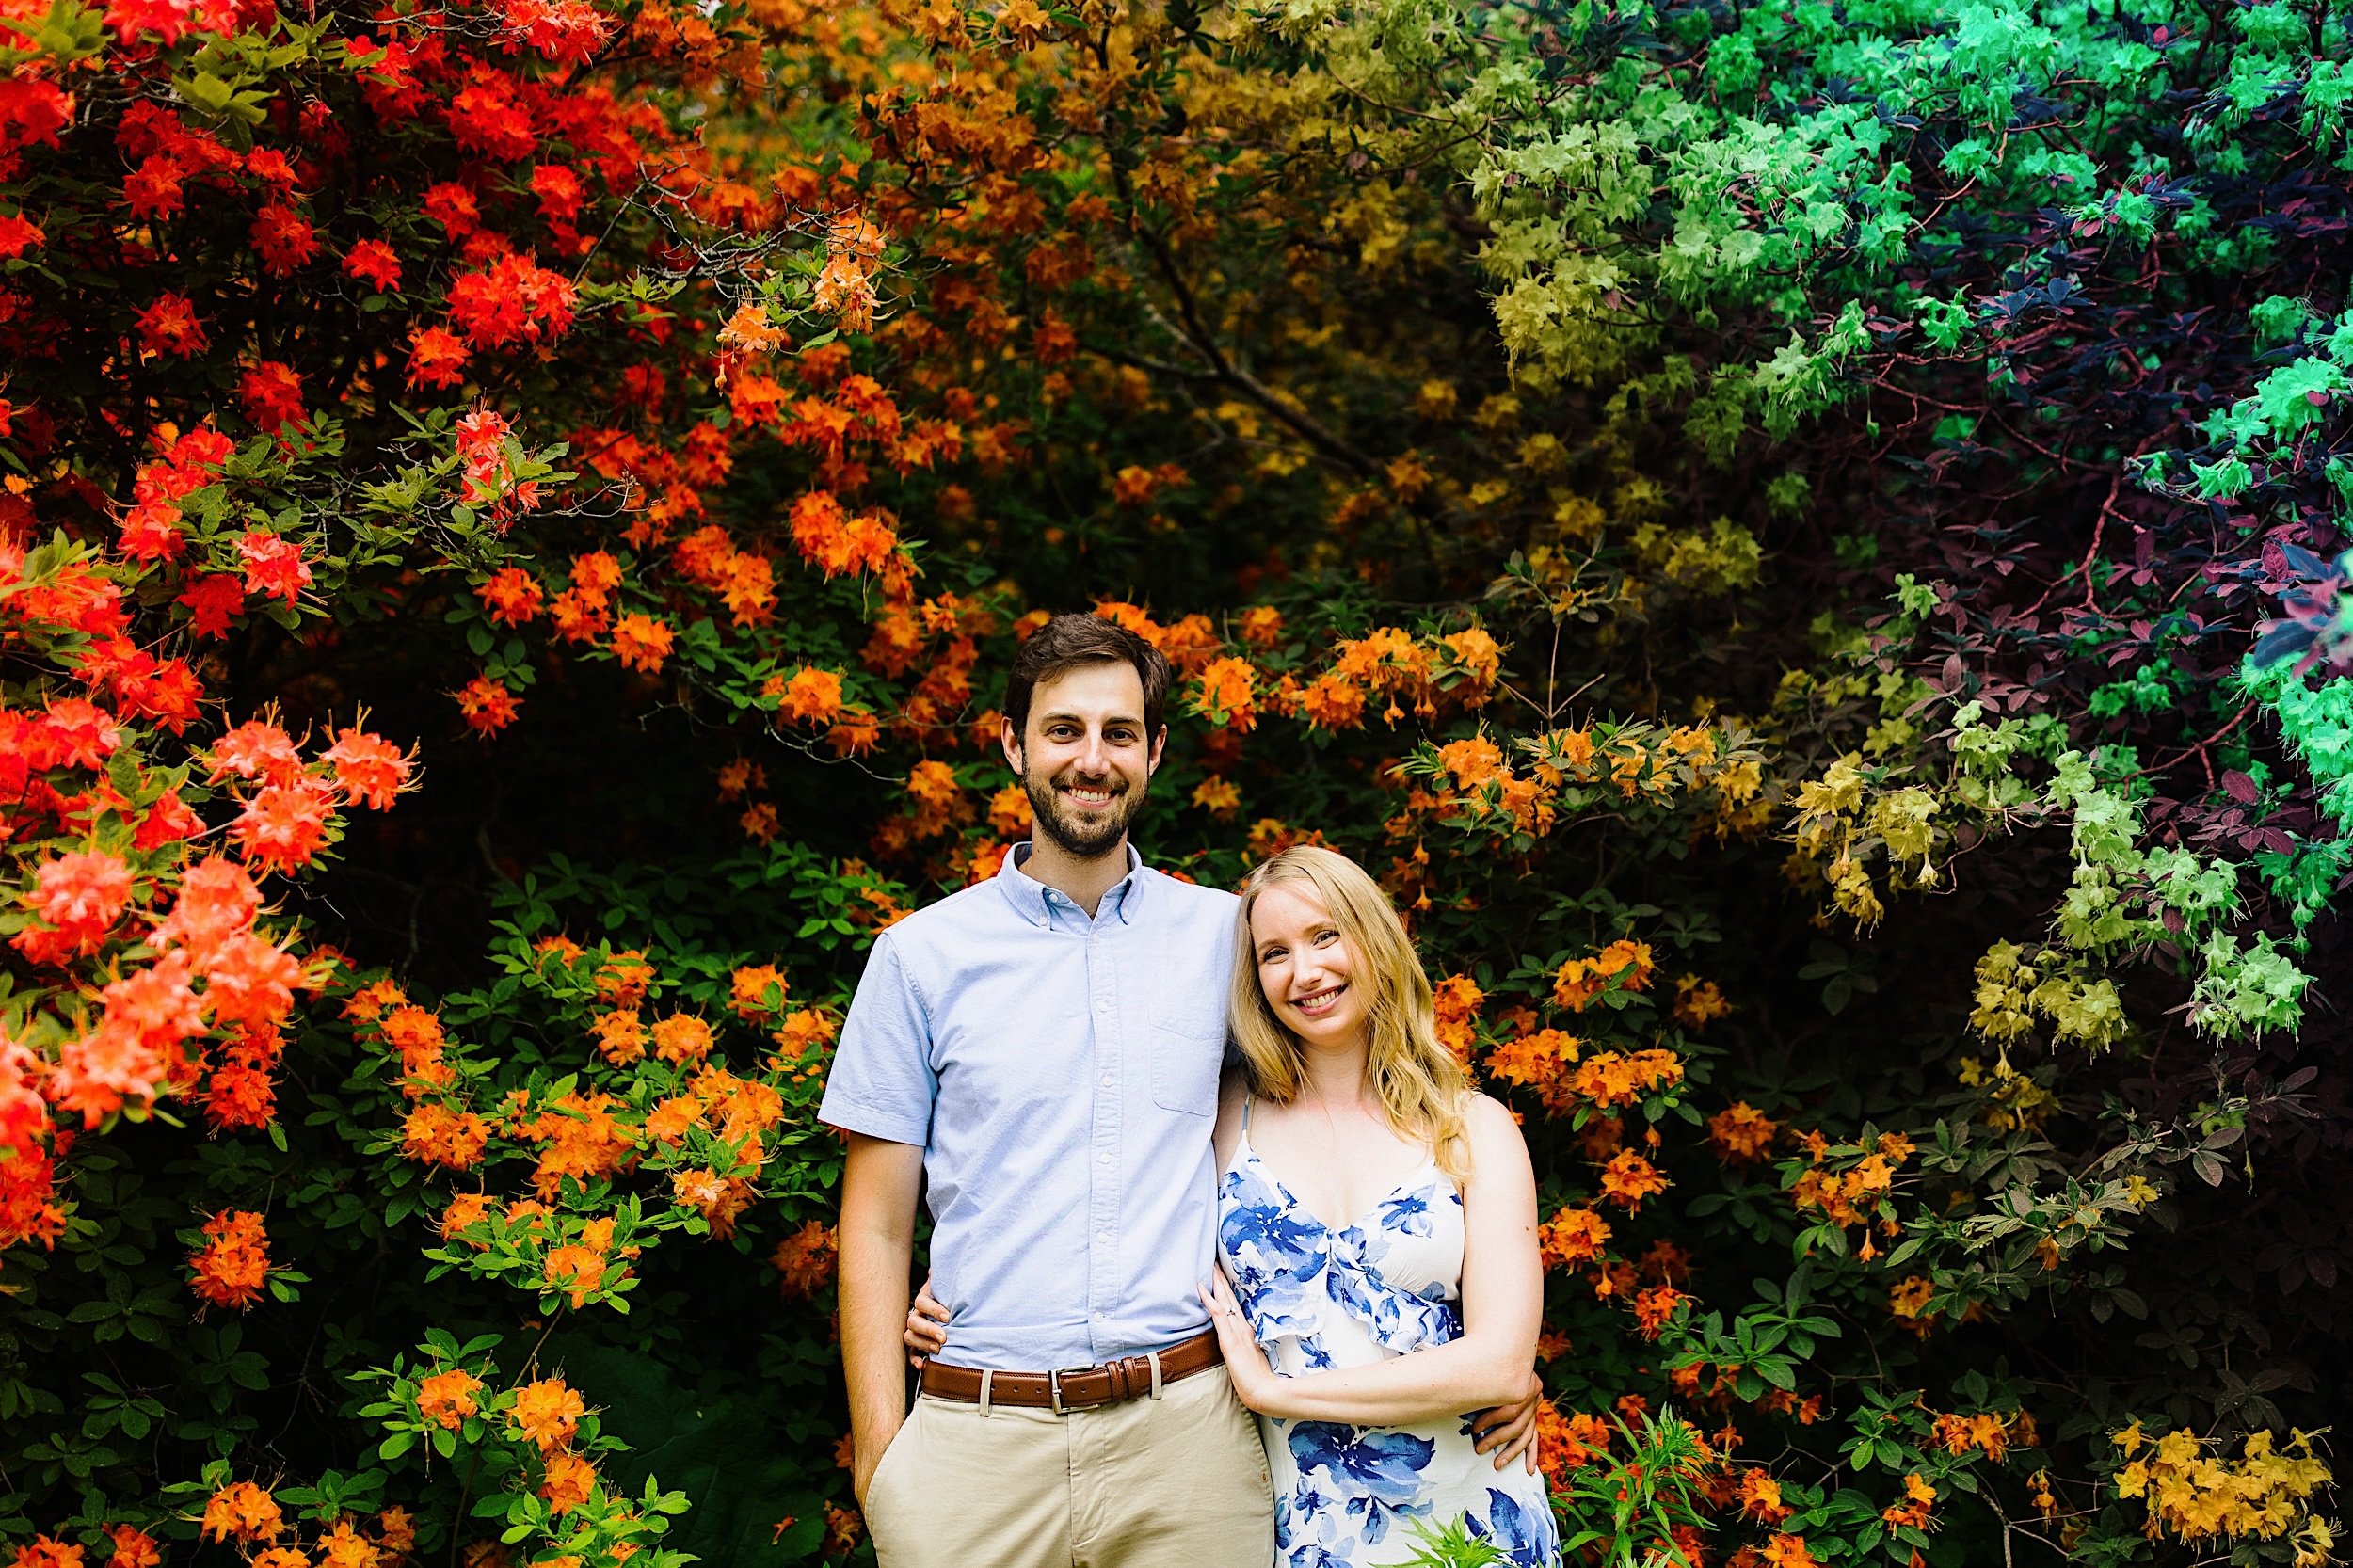 031-ZacWolfPhotography-20220607-Blog_Portrait-of-couple-in-Orlando-in-front-of-flowers.jpg